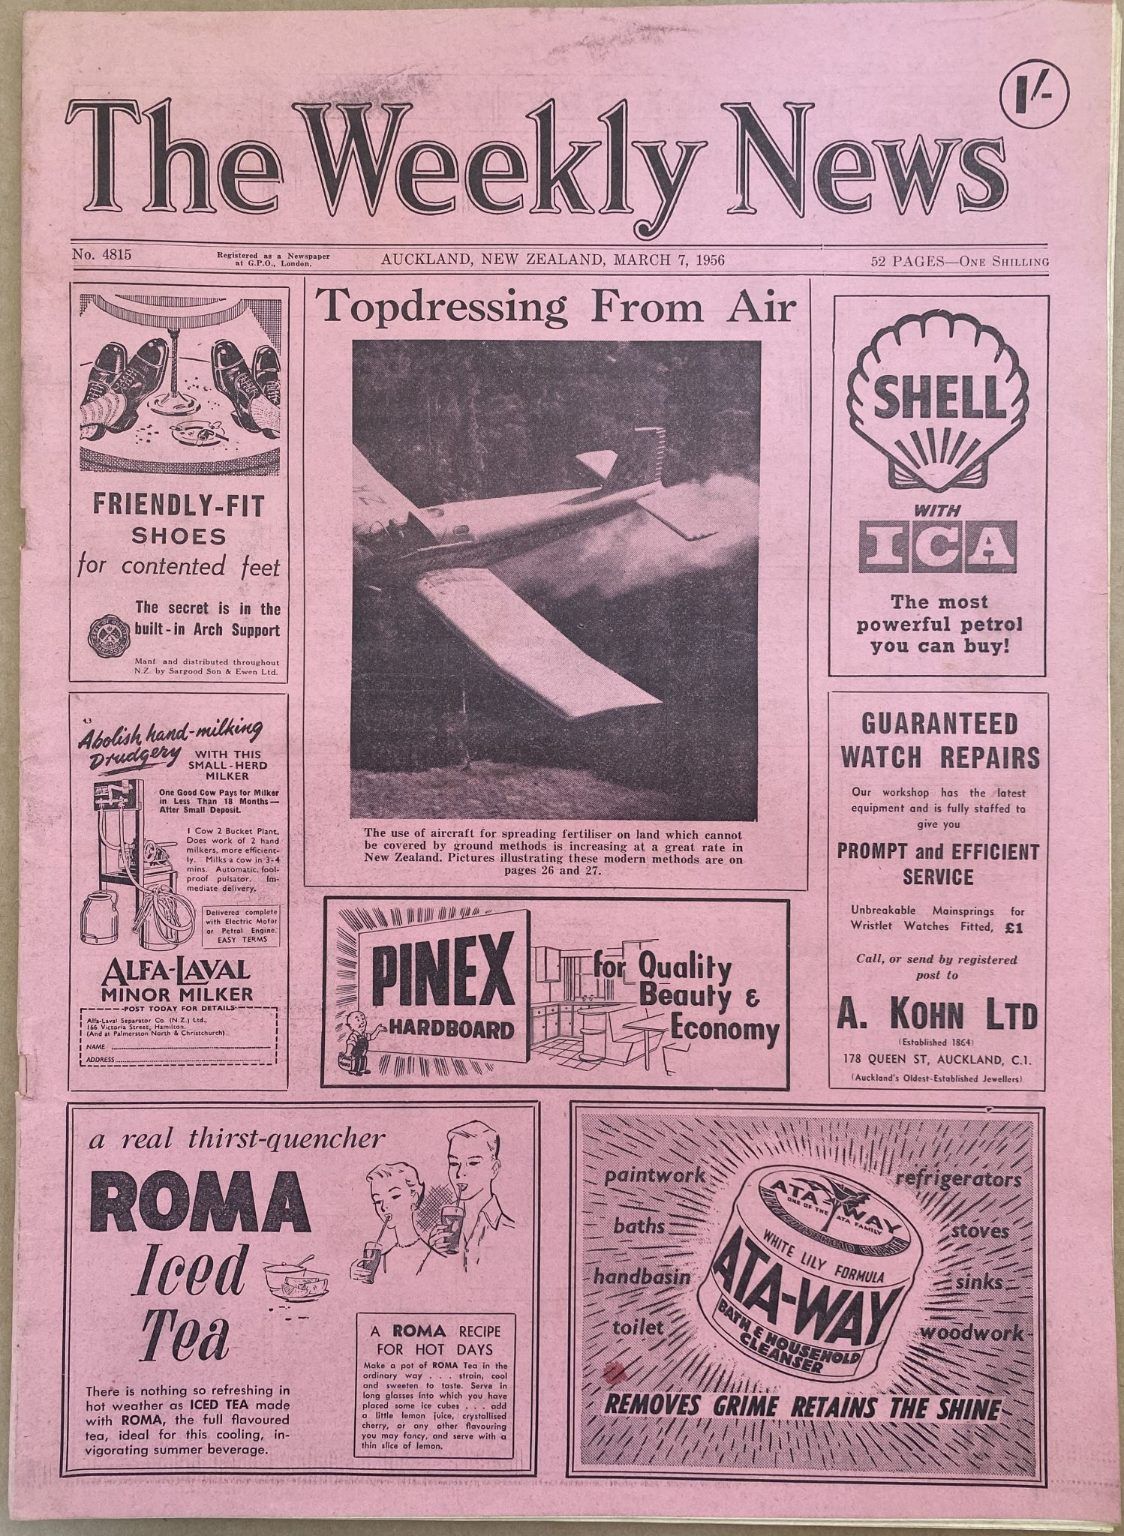 OLD NEWSPAPER: The Weekly News - No. 4815, 7 March 1956